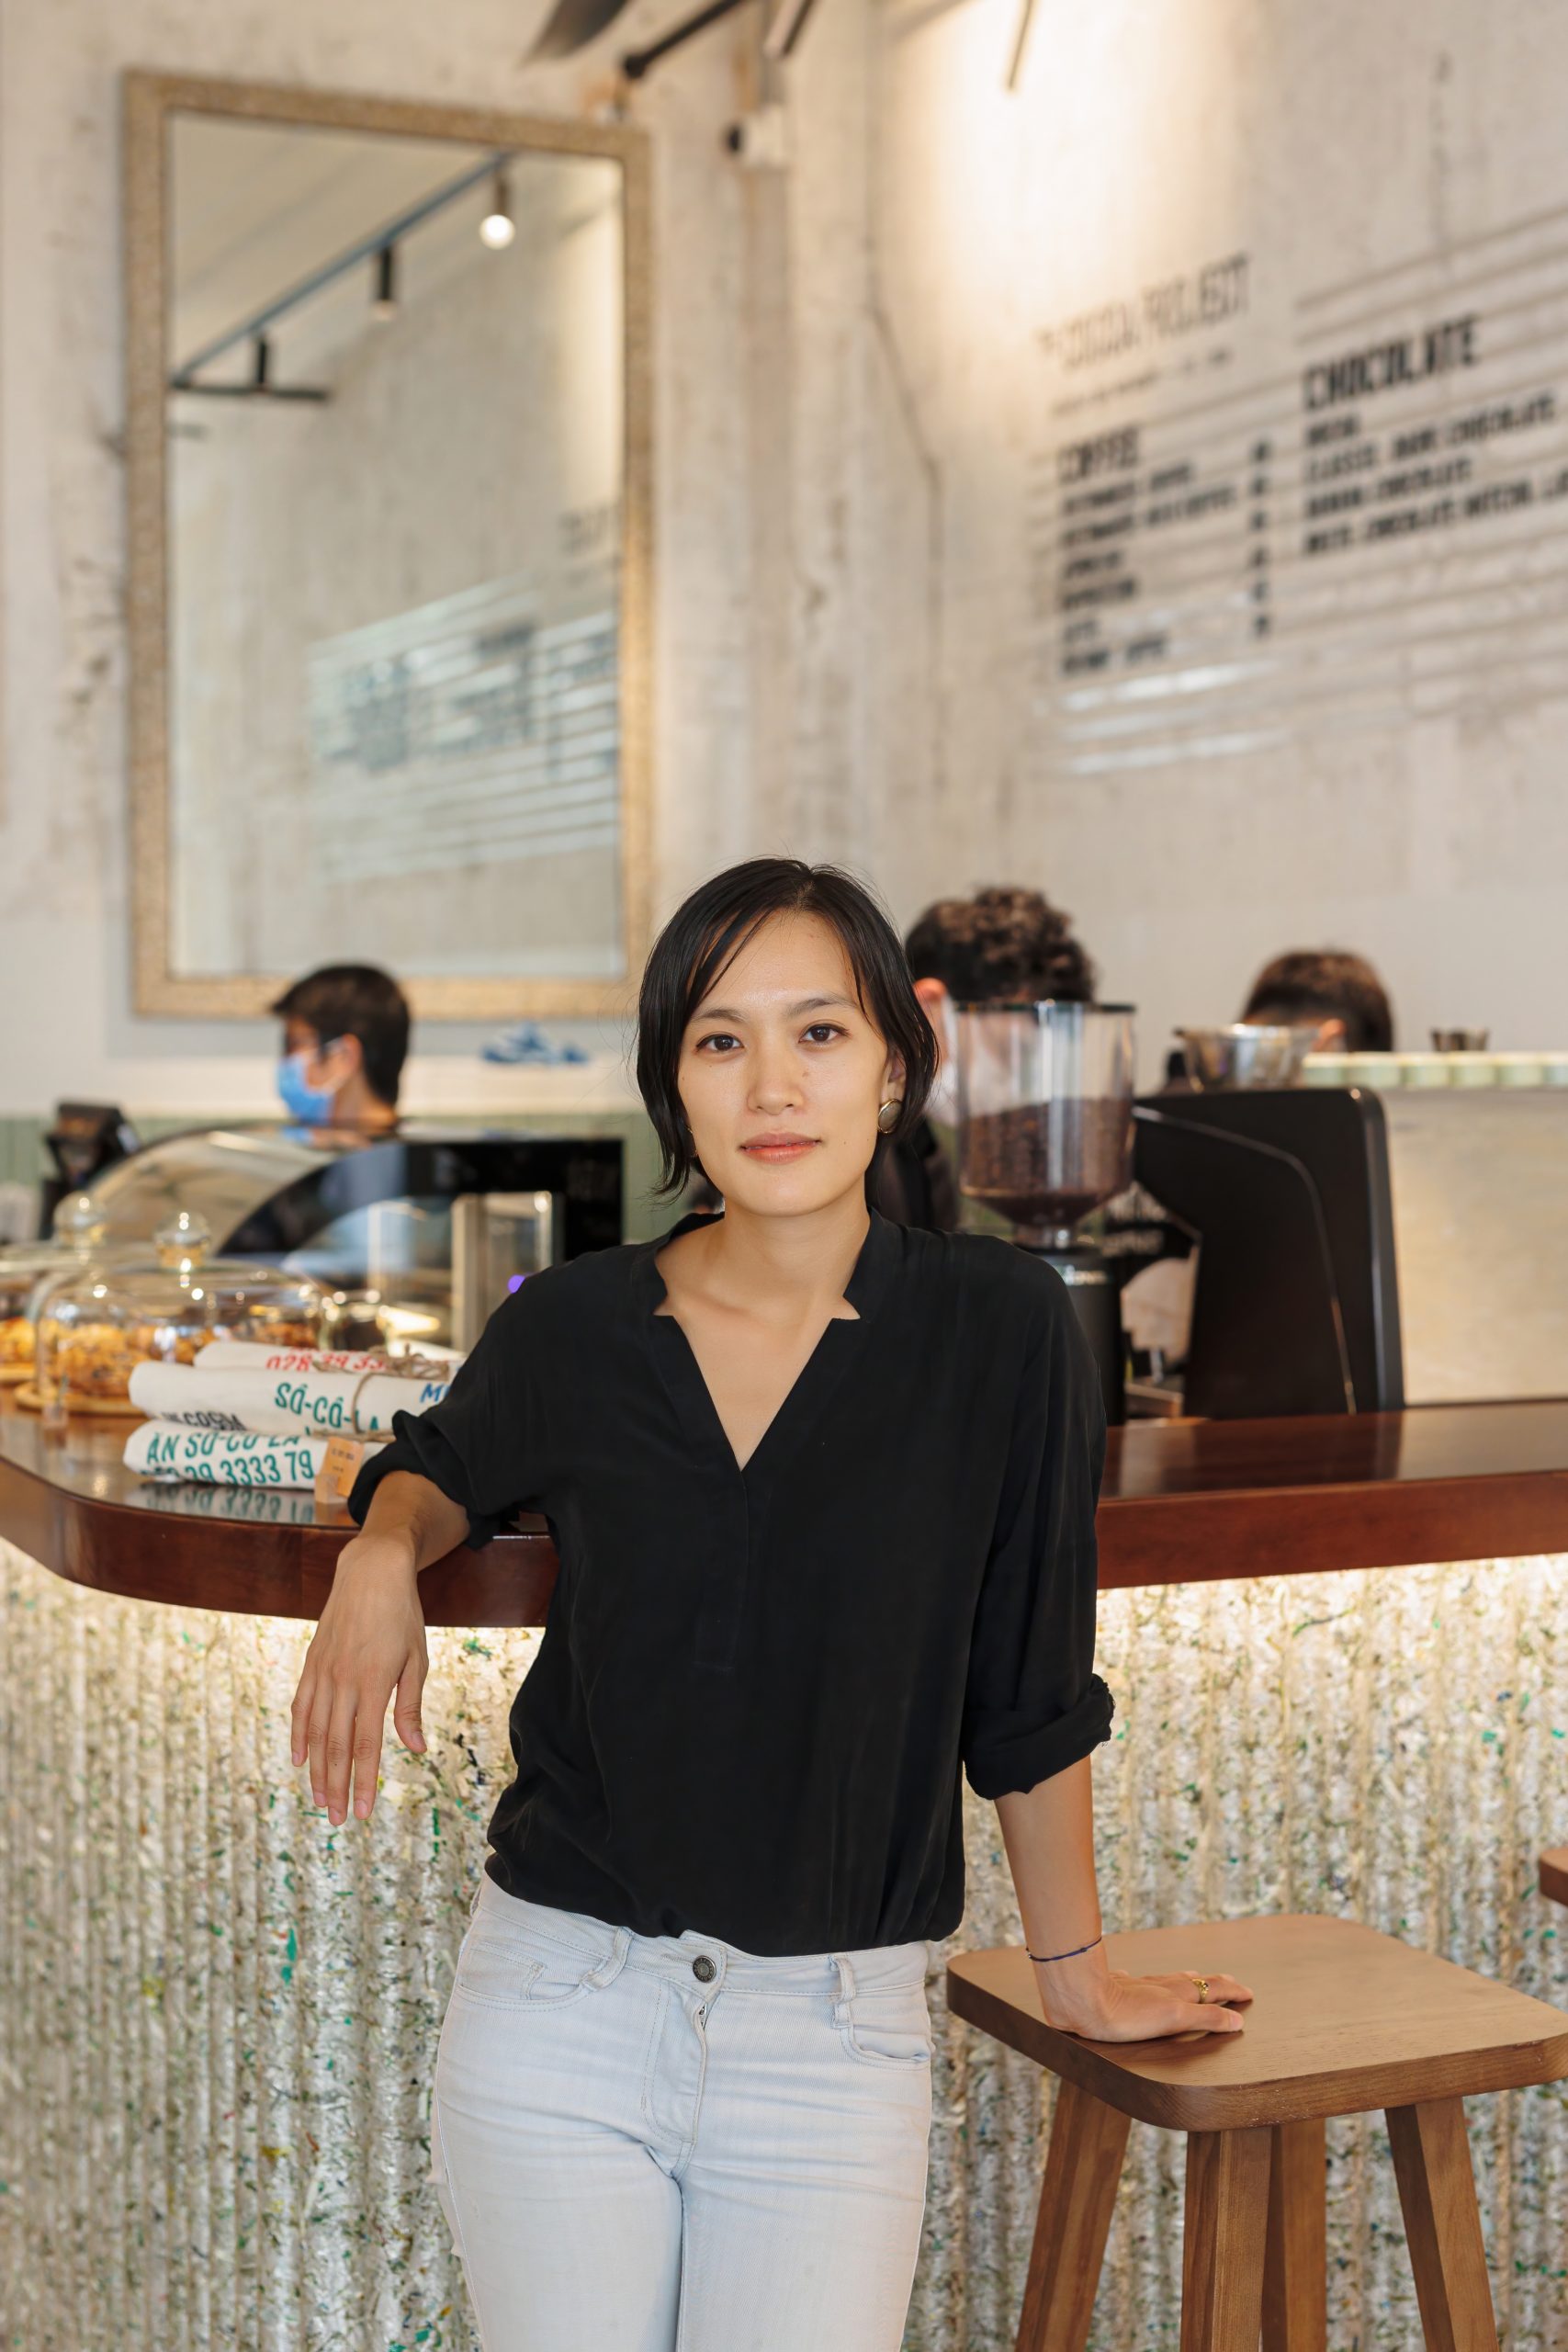 French-born Khanh-Linh Le of The Cocoa Project